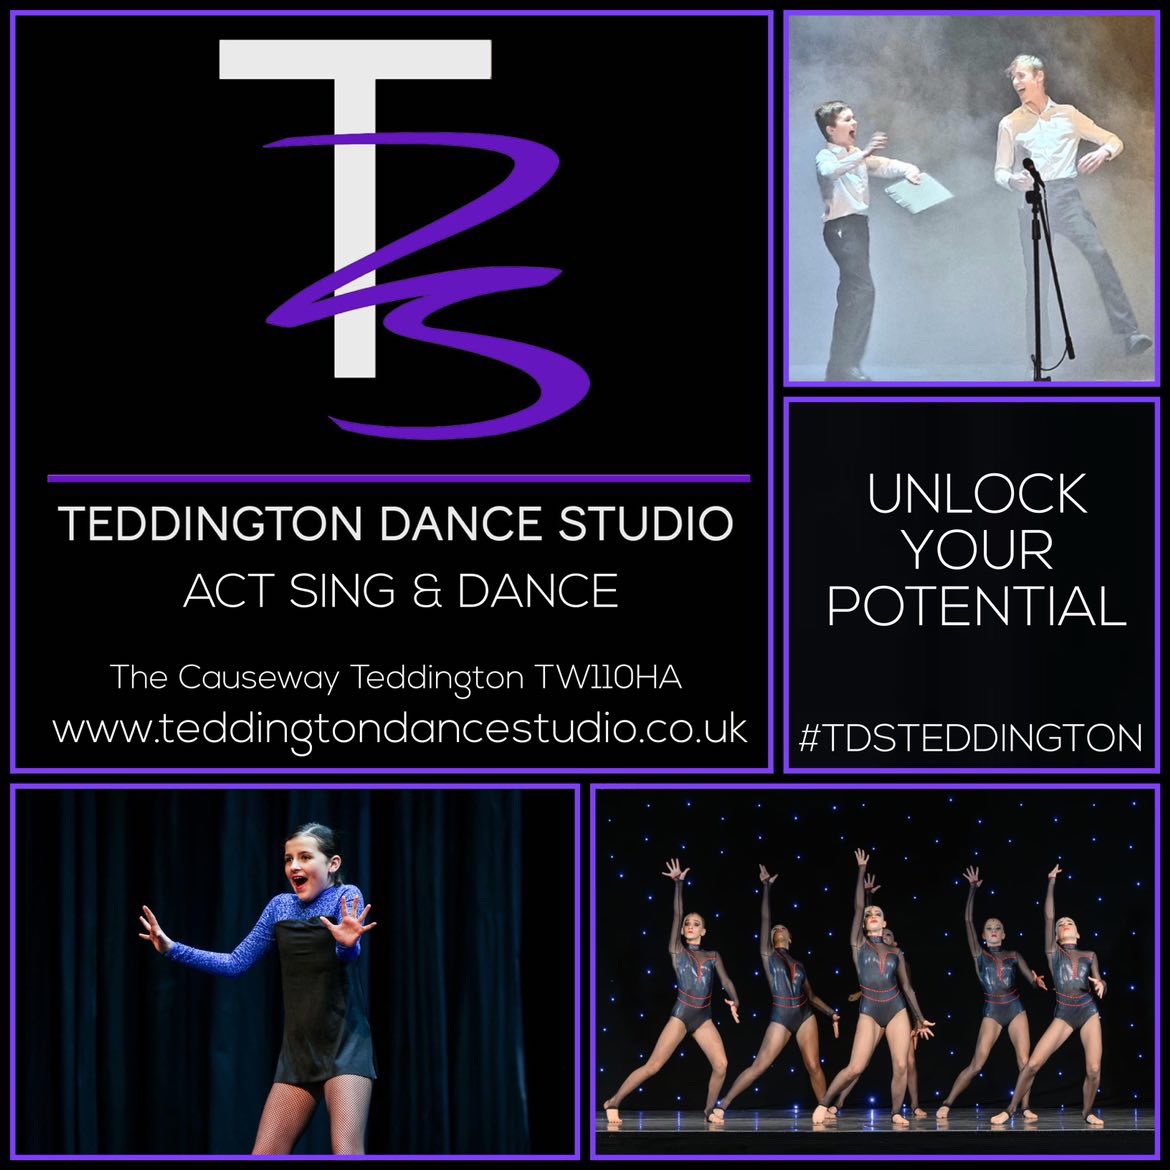 Unlock your or your child’s potential Teddington Dance Studio with their amazing Dance, singing and acting lessons! Get in touch today! #tdsteddington #tdsdancestudio #teddingtondancestudio teddingtondancestudio.co.uk